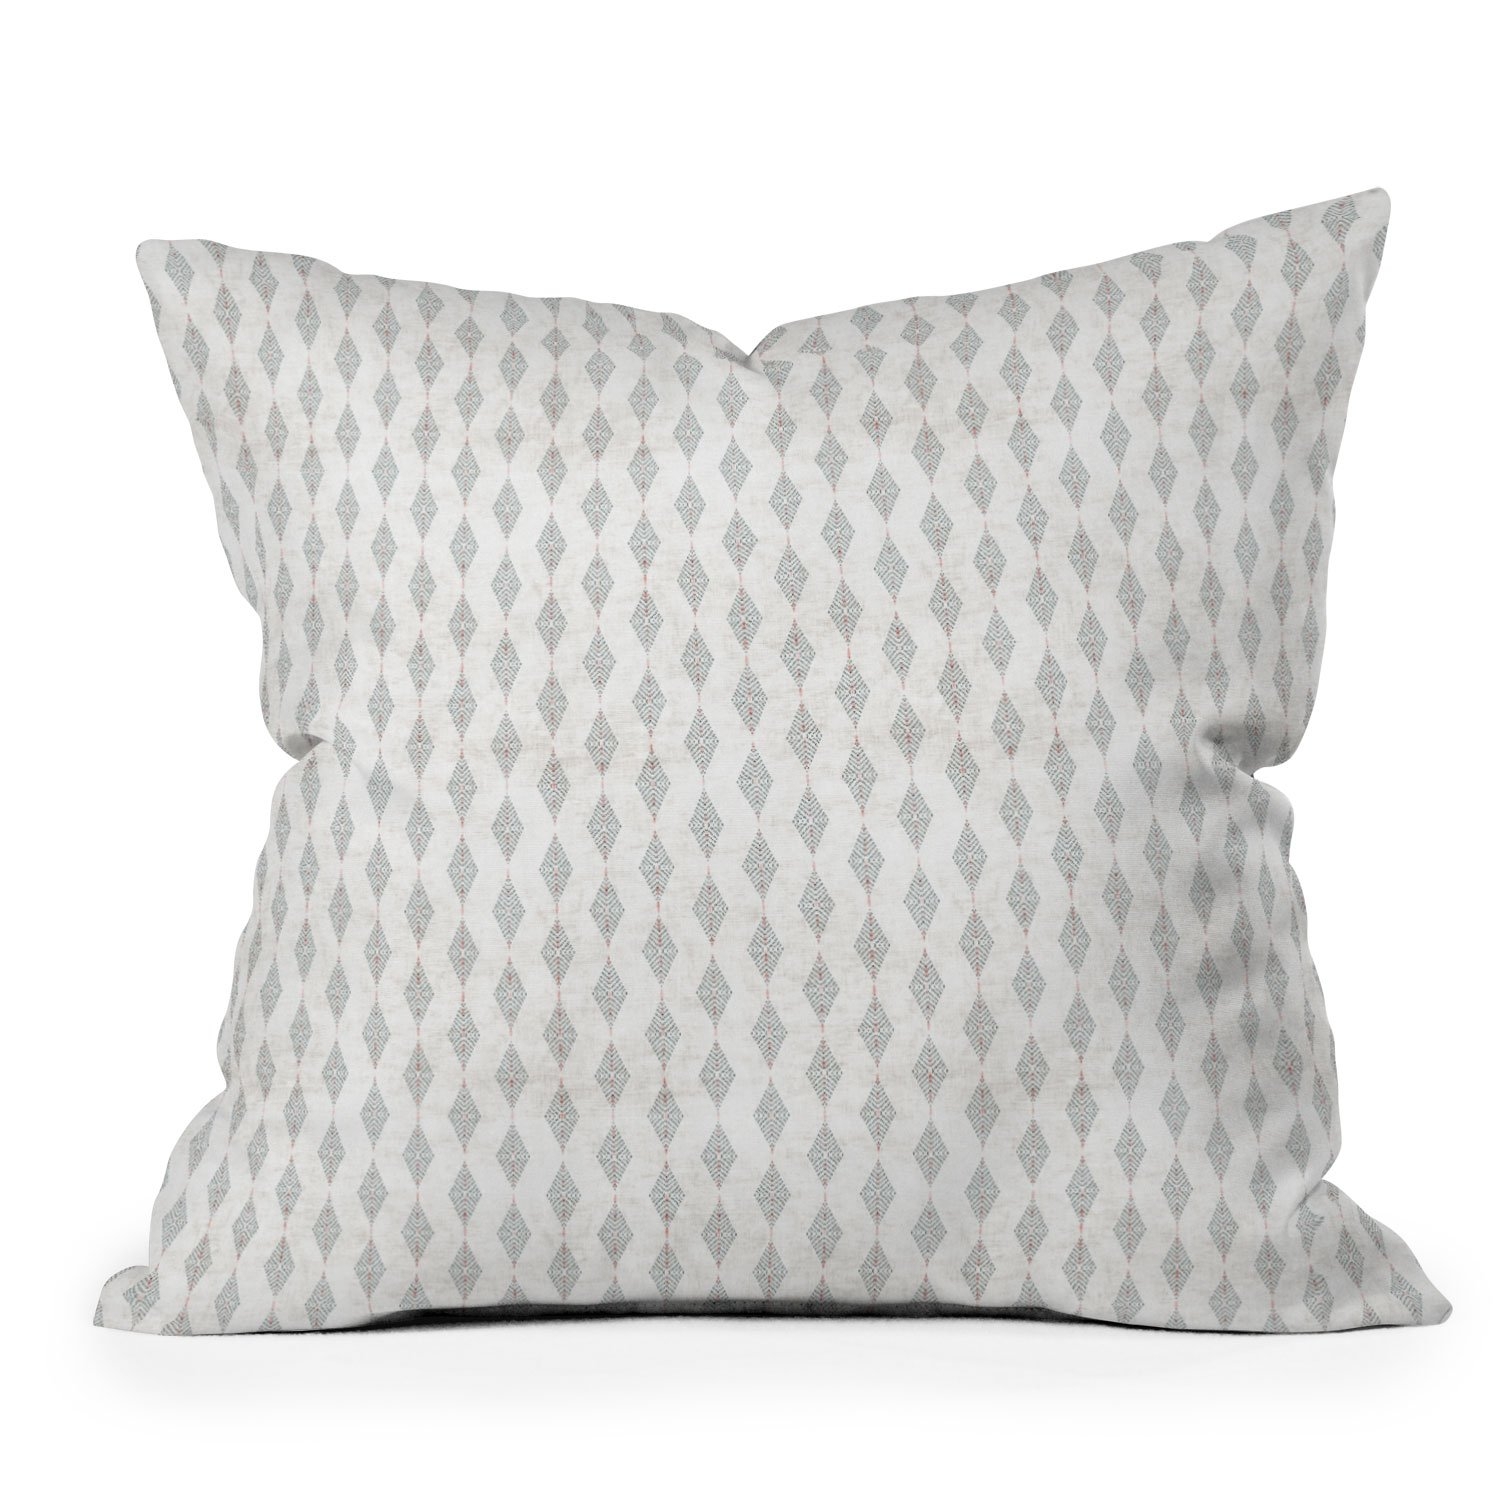 BOHO DIAMOND Throw Pillow with insert 18x18 (with insert) - Image 0